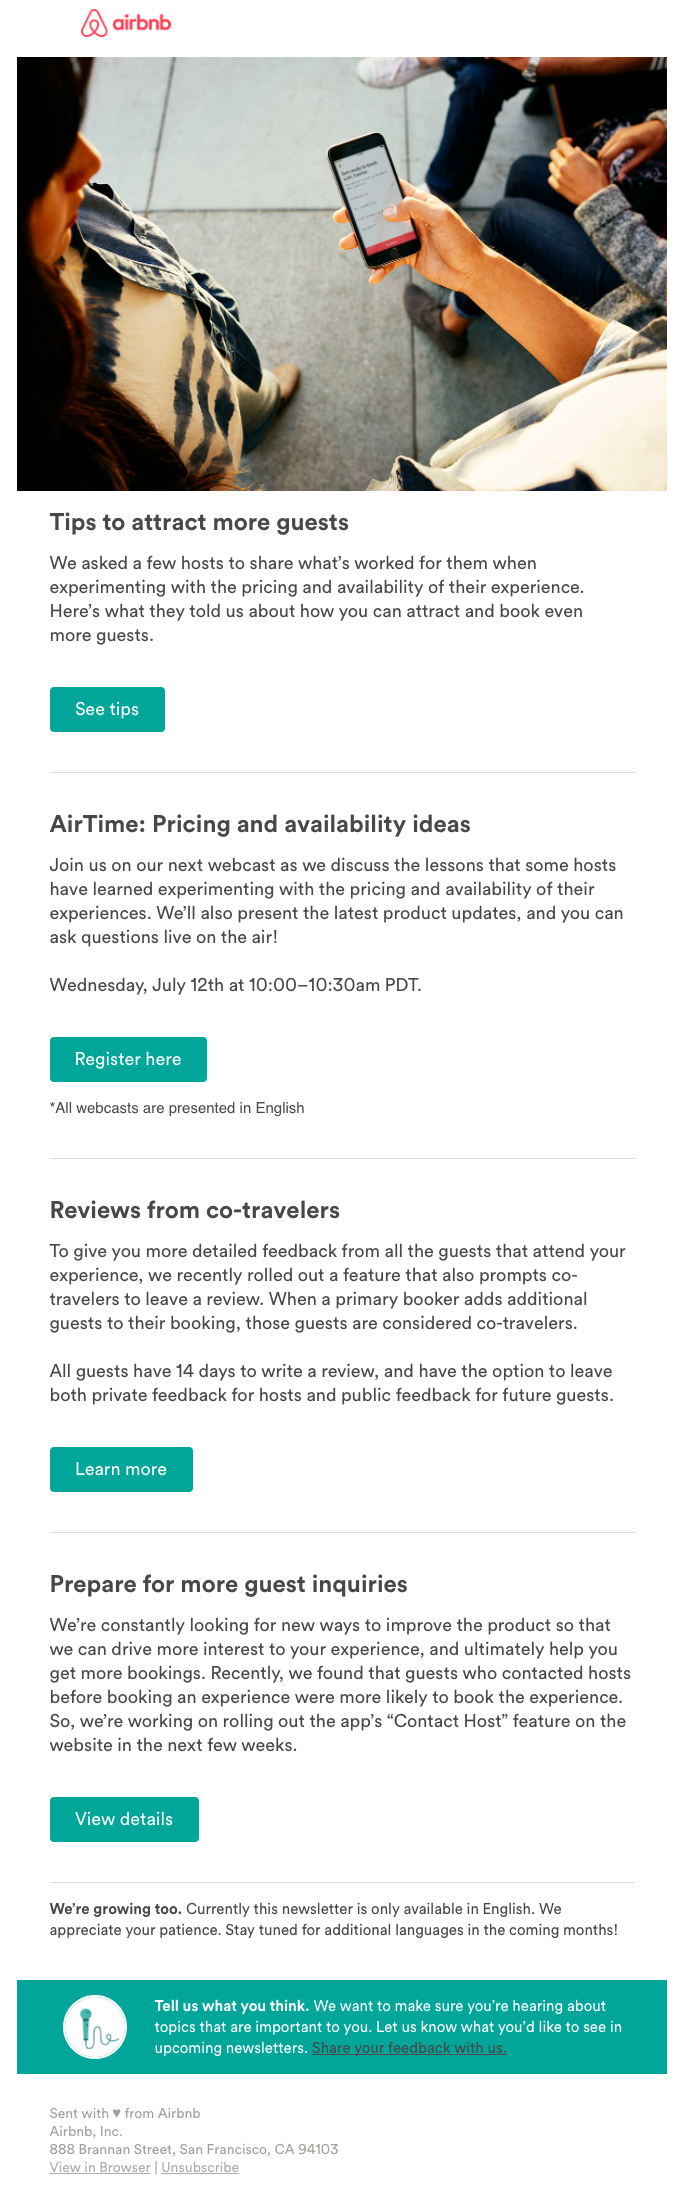 Airbnb Experiences Newsletter Sample5